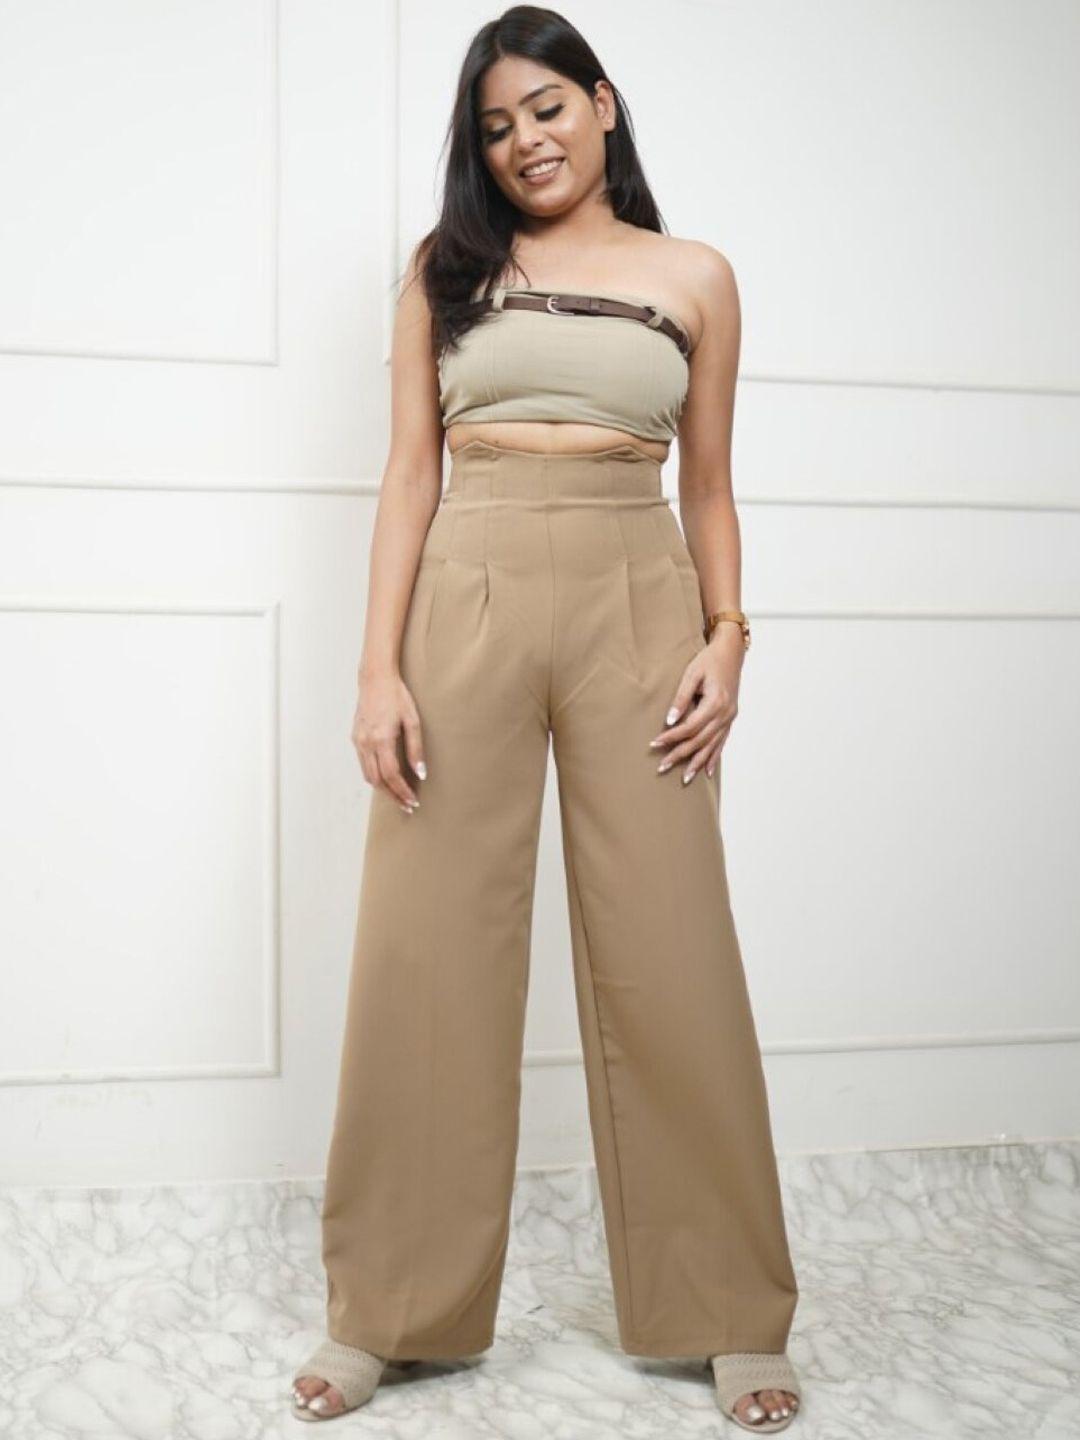 styleash strapless top with trouser